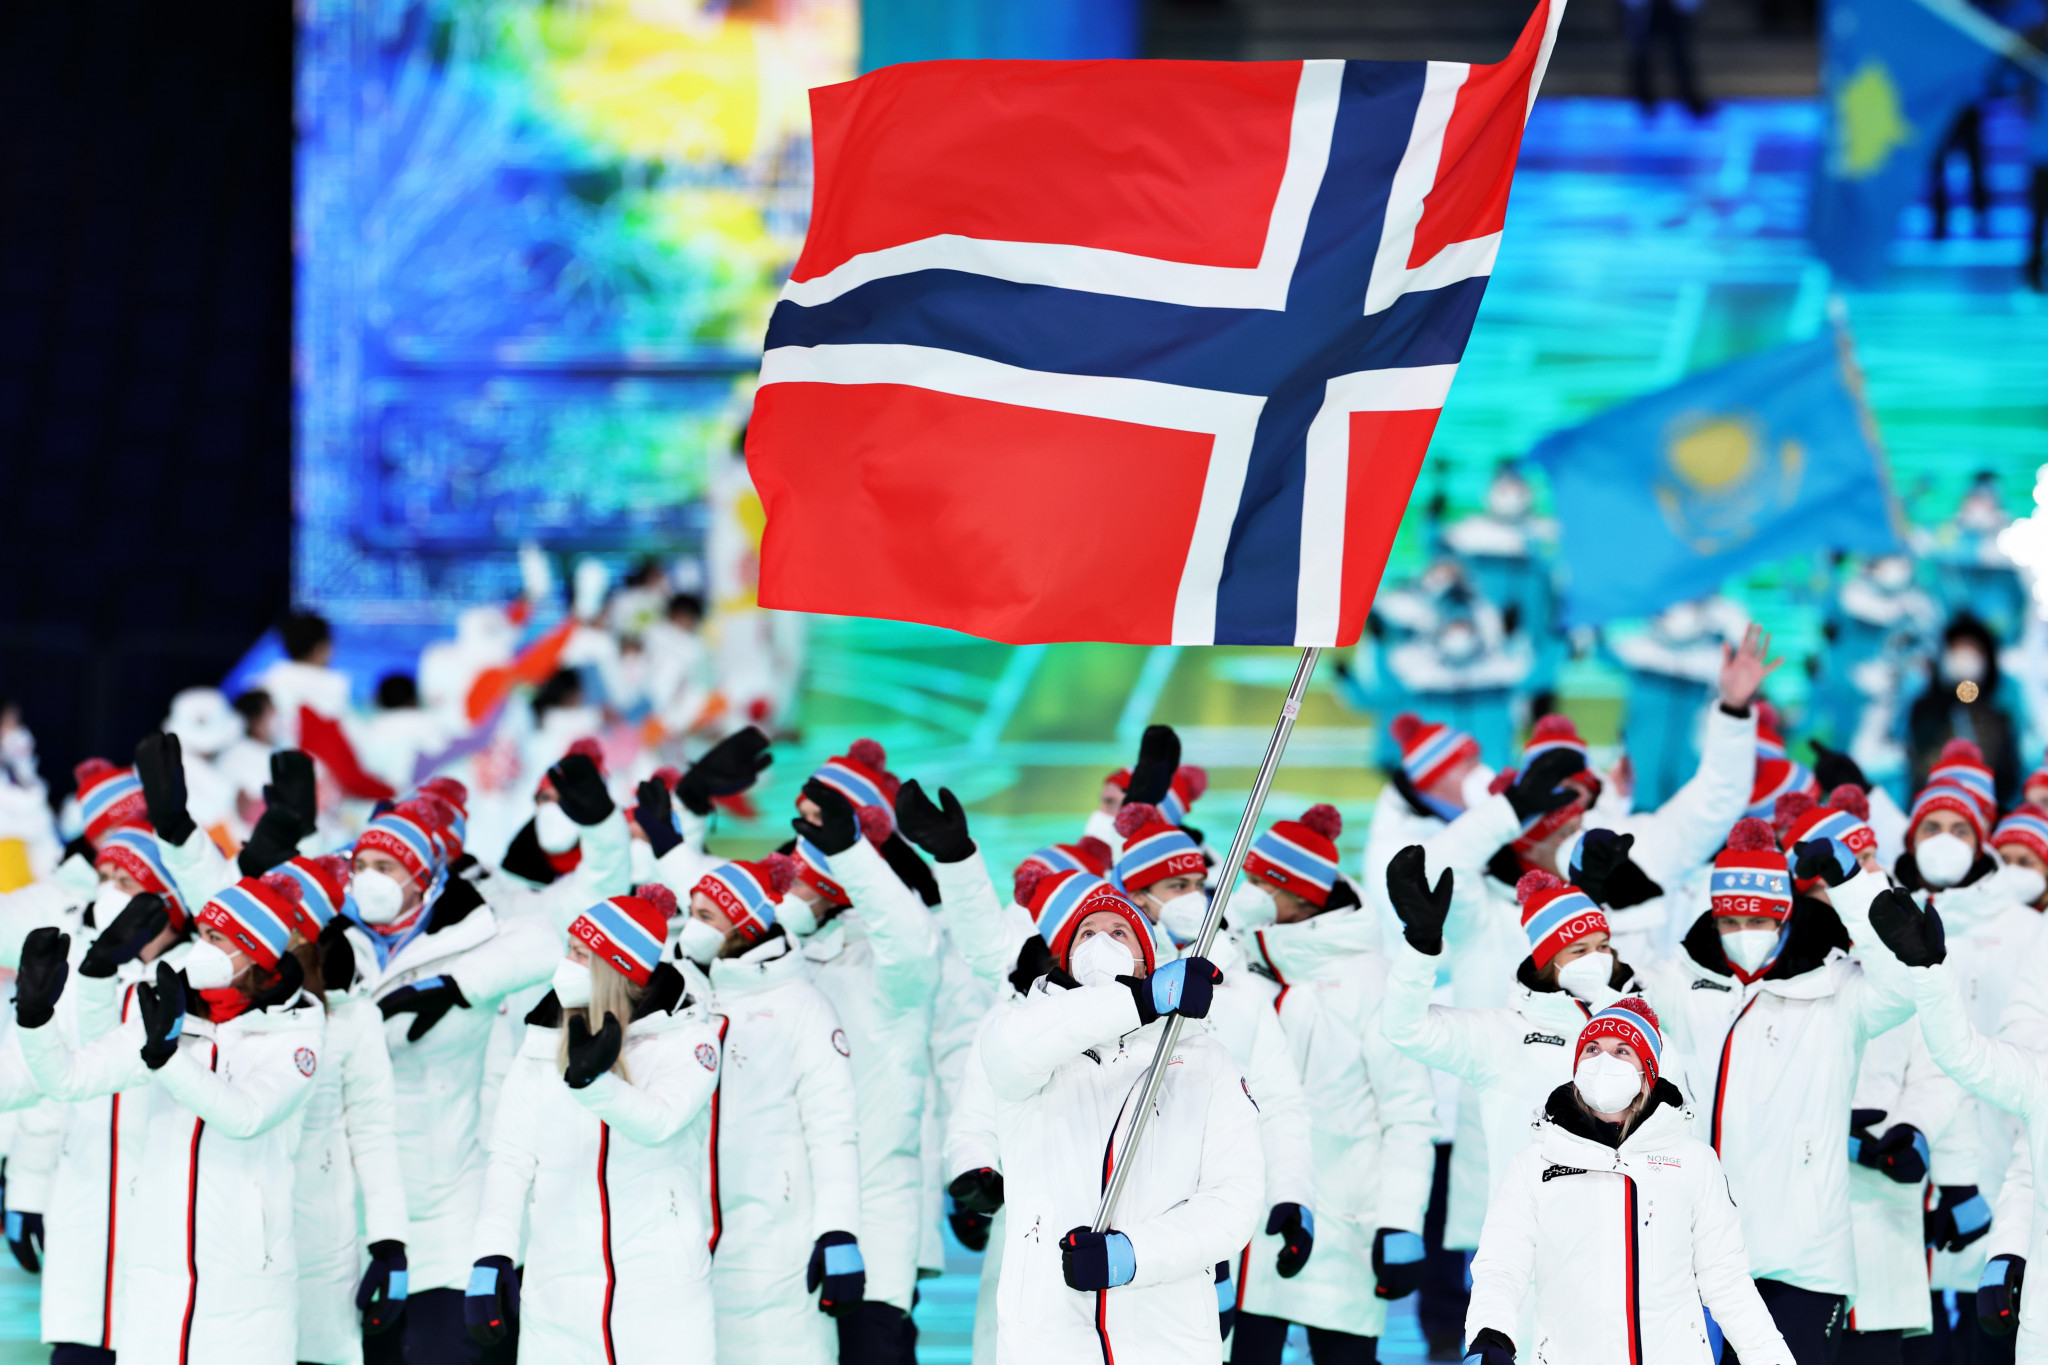 Norway underage anti-doping issue first flagged in 2019 but no action taken